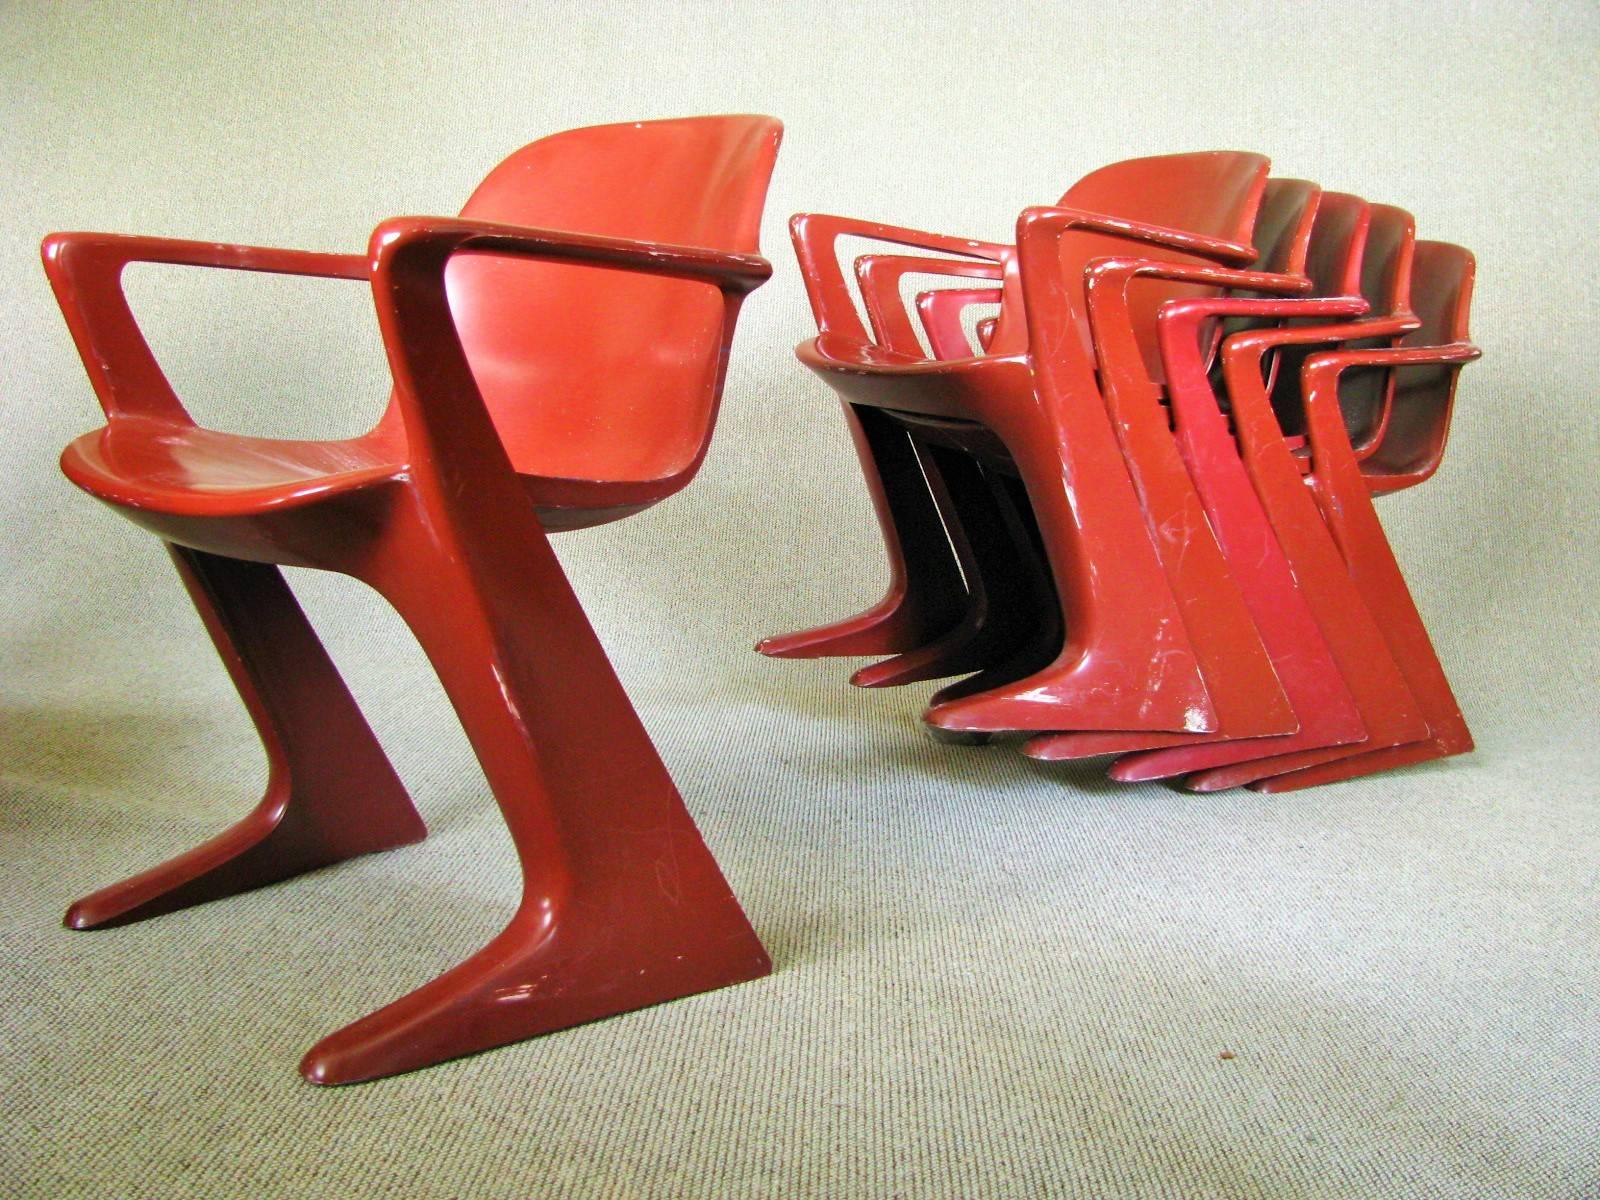 Set of six Midcentury German dining room chairs from Ernst Moeckl, 1968


So called Z-Chair. Designed 1968 in the GDR by Ernst Moeckl (*1931) and Siegfried Mehl, German Version of the Panton Chair. Also called kangoroo chair or variopur chair.